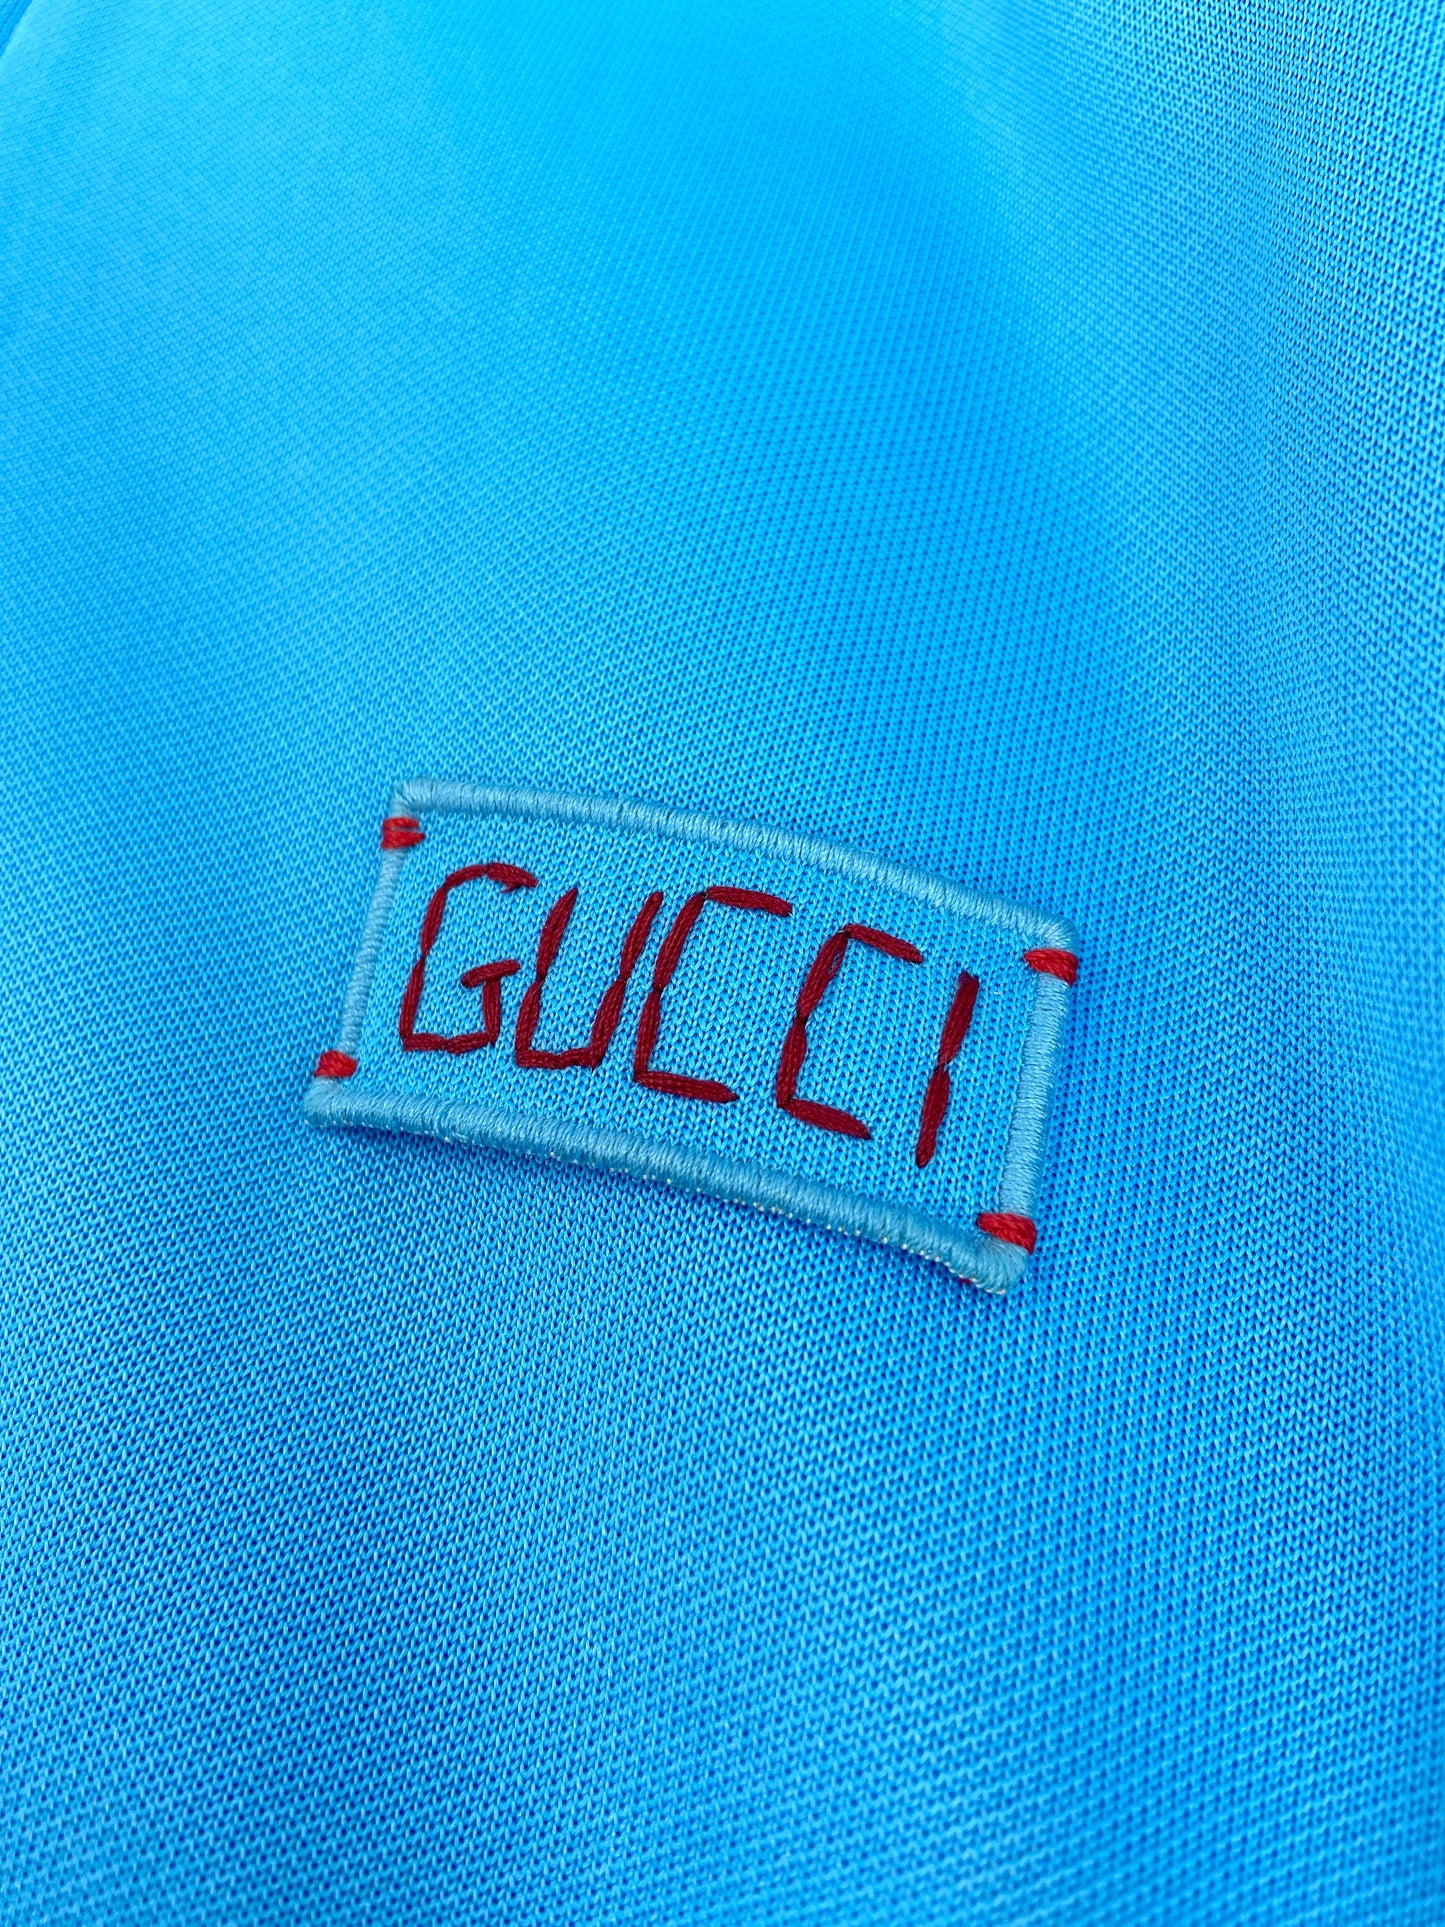 BWNT Gucci Resort 2018 Alessandro Michele Tiger Embroidery Blue Track Jacket XXXL